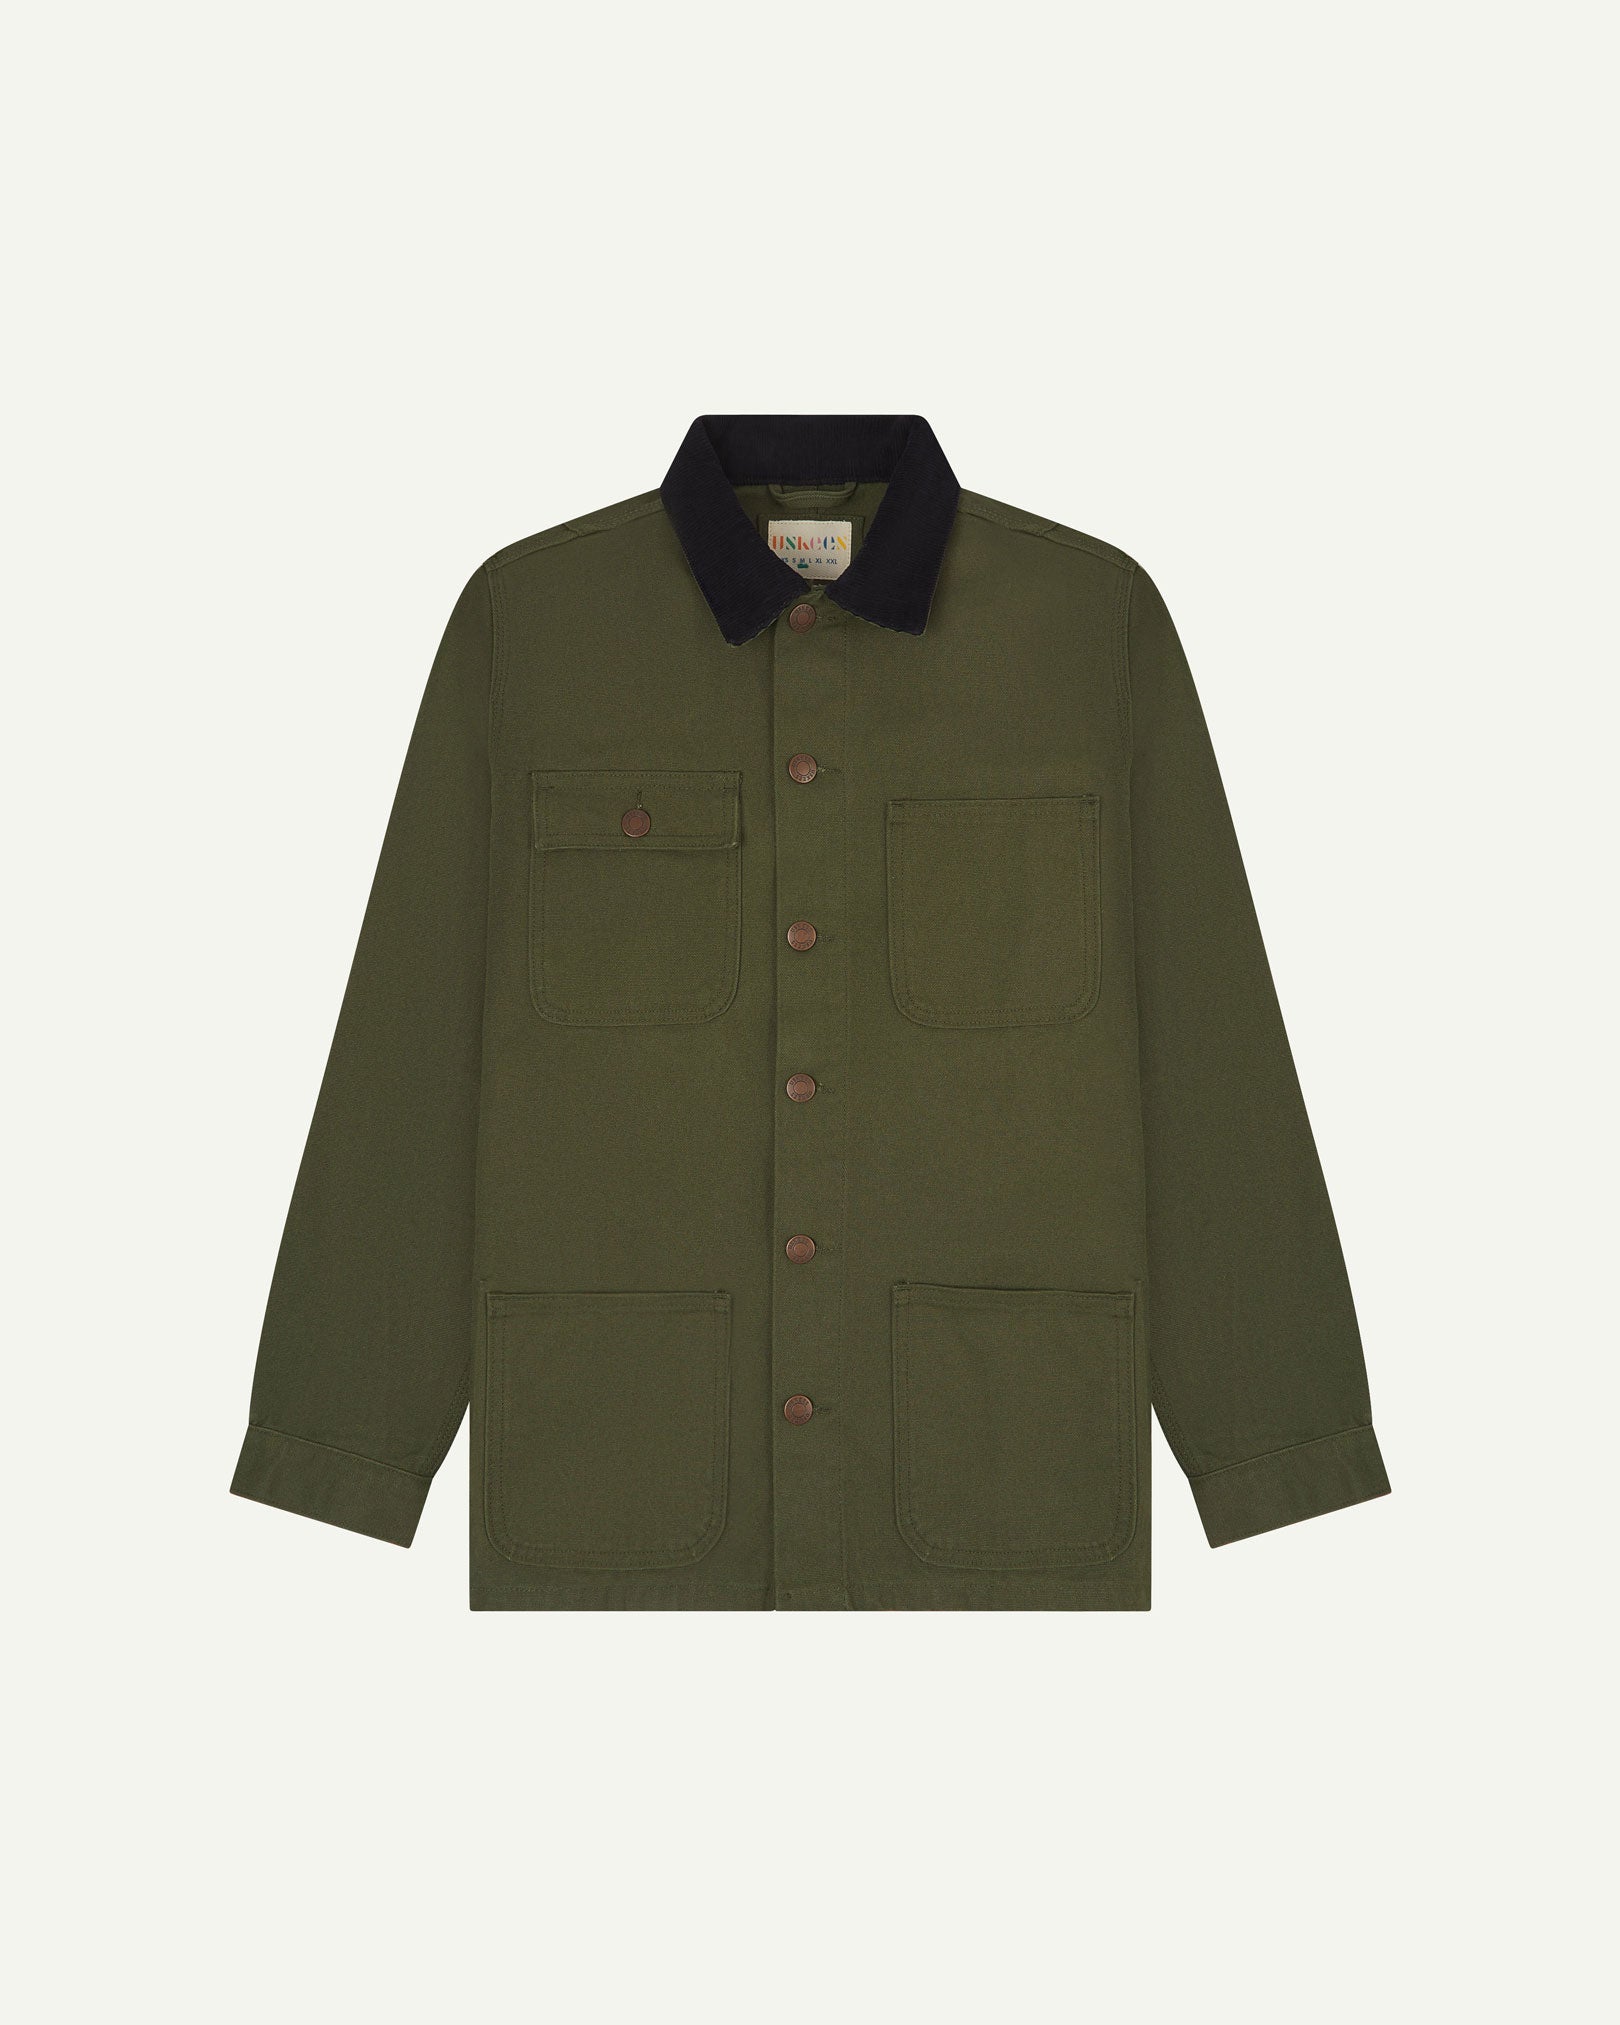 Front flat shot of Uskees cotton canvas chore jacket in coriander green with a navy blue collar. Clear view of the pockets and buttons.